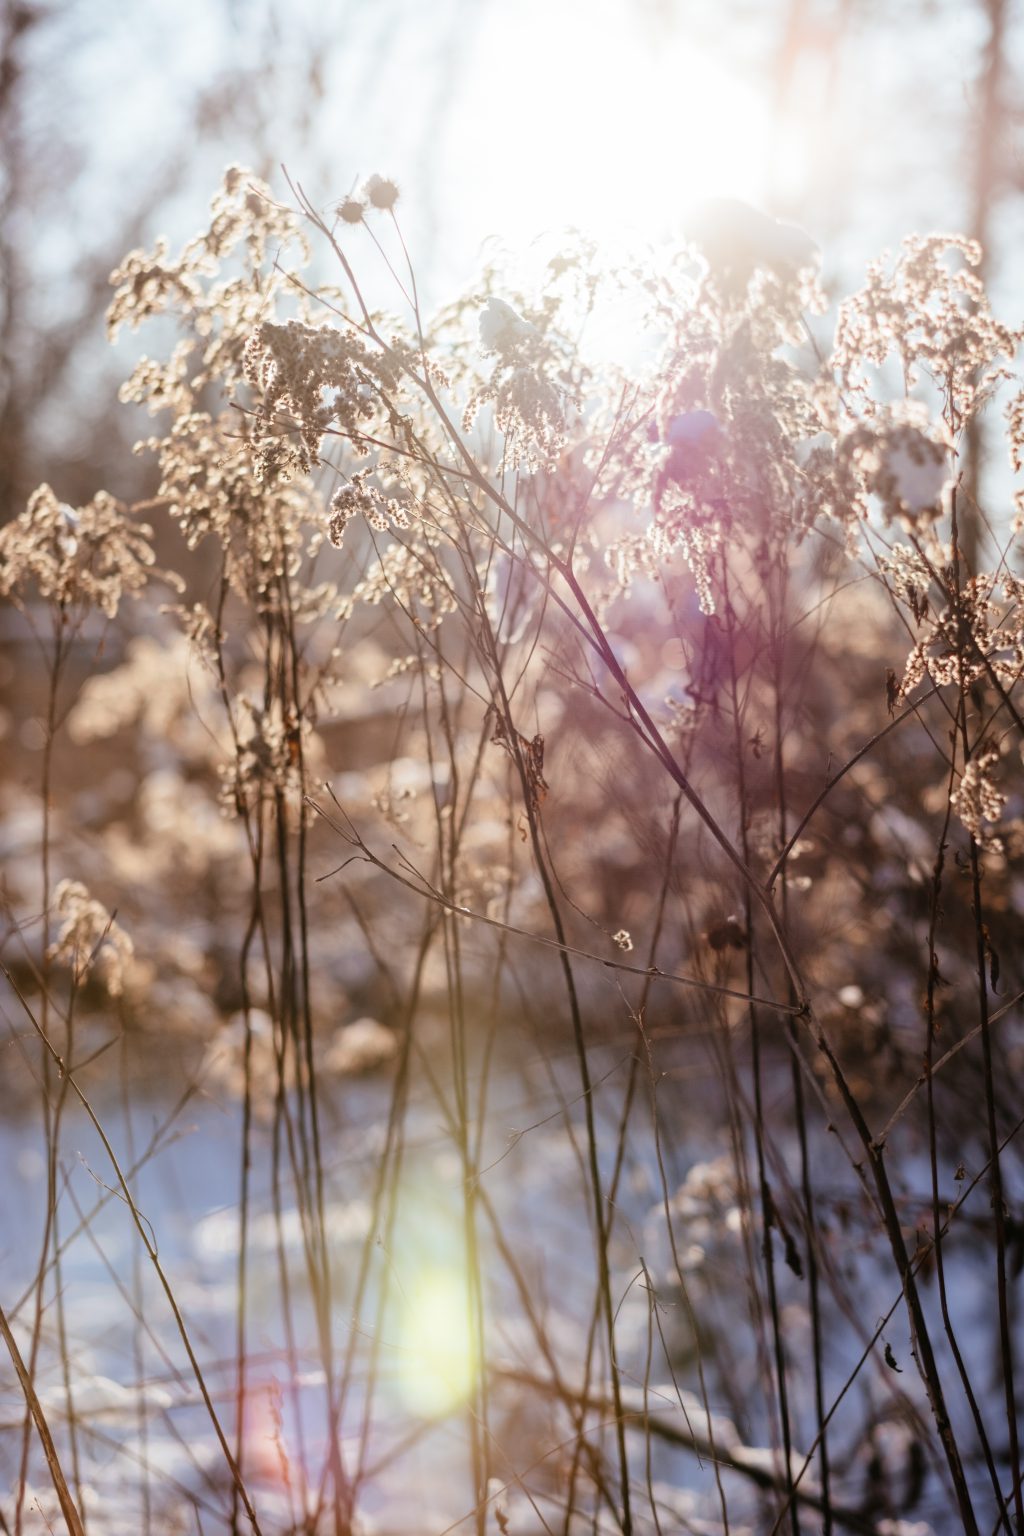 Wild grass in the sun on a winter afternoon 6 - free stock photo